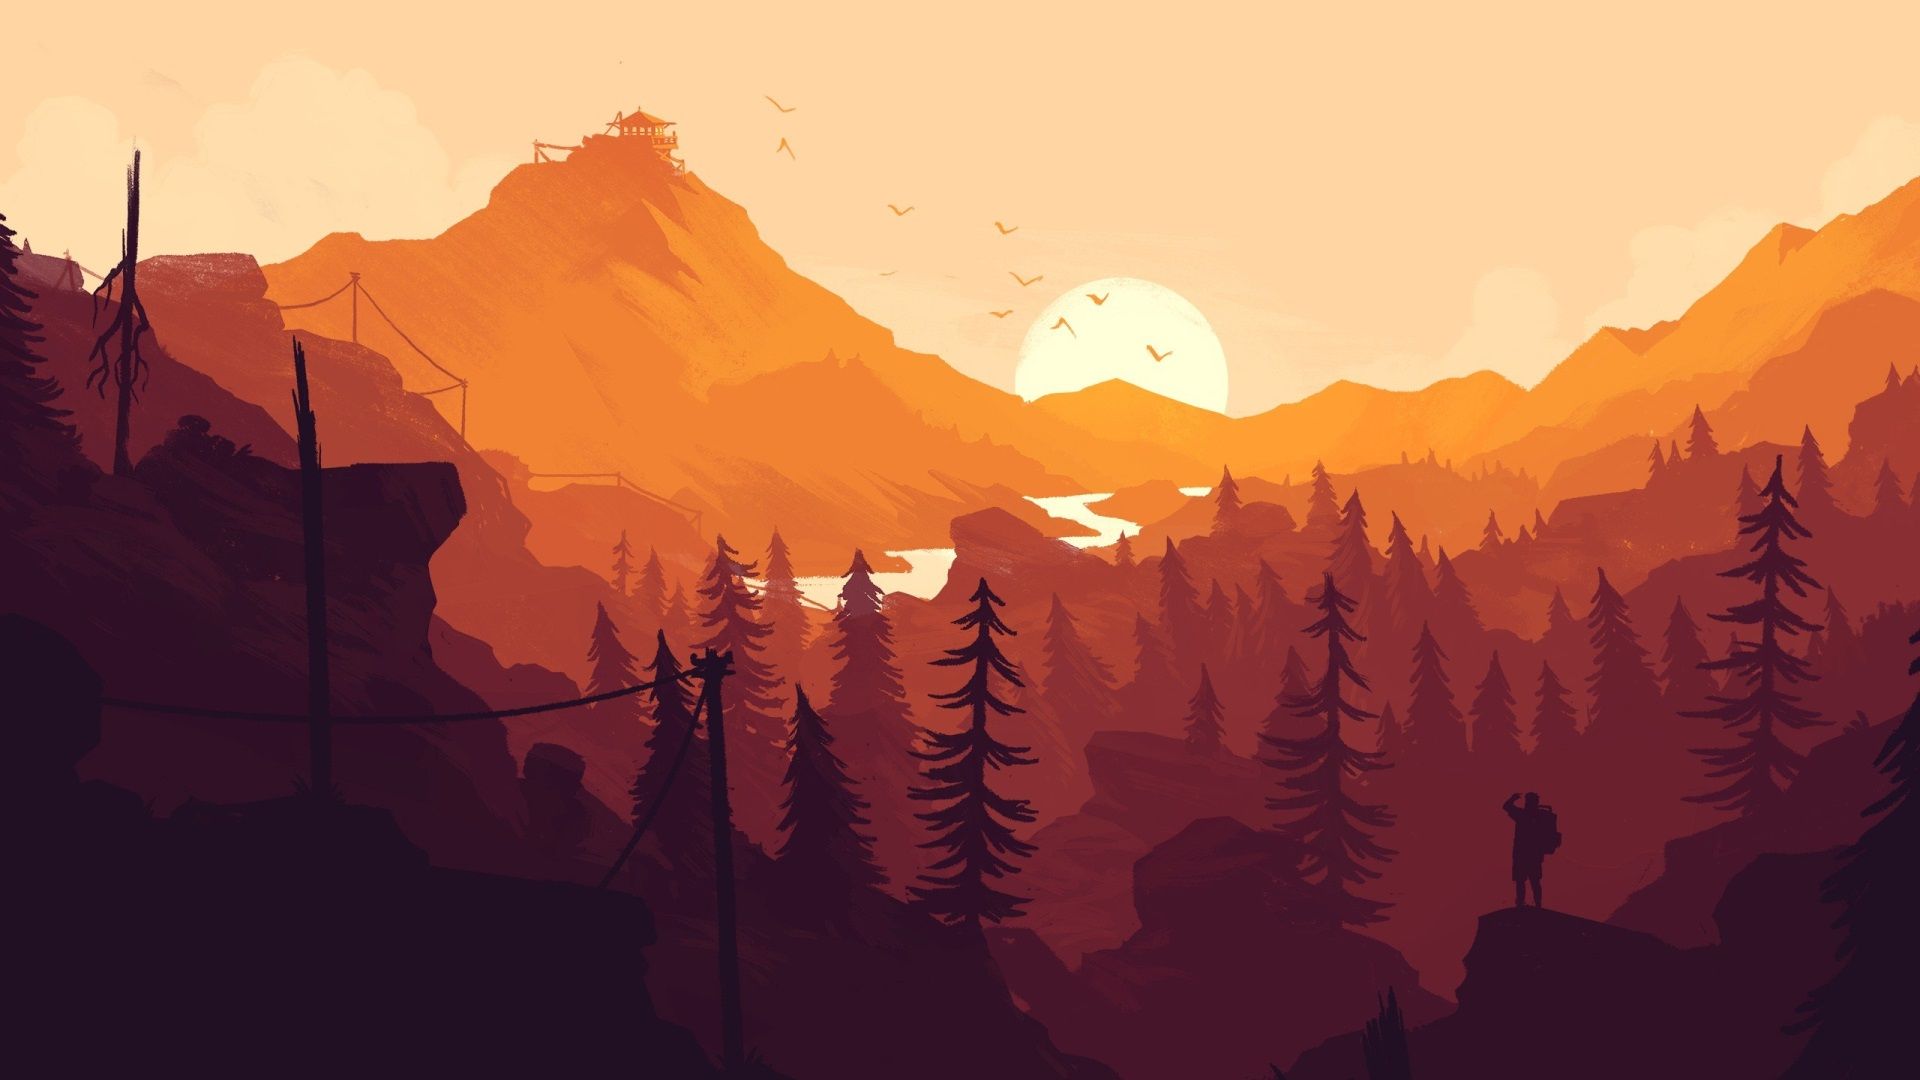 Immerse yourself in the mystery and beauty of the great outdoors with our Firewatch wallpapers. These stunning visuals capture the essence of nature and adventure, and will take you on a journey through lush forests, epic vistas, and awe-inspiring landscapes.